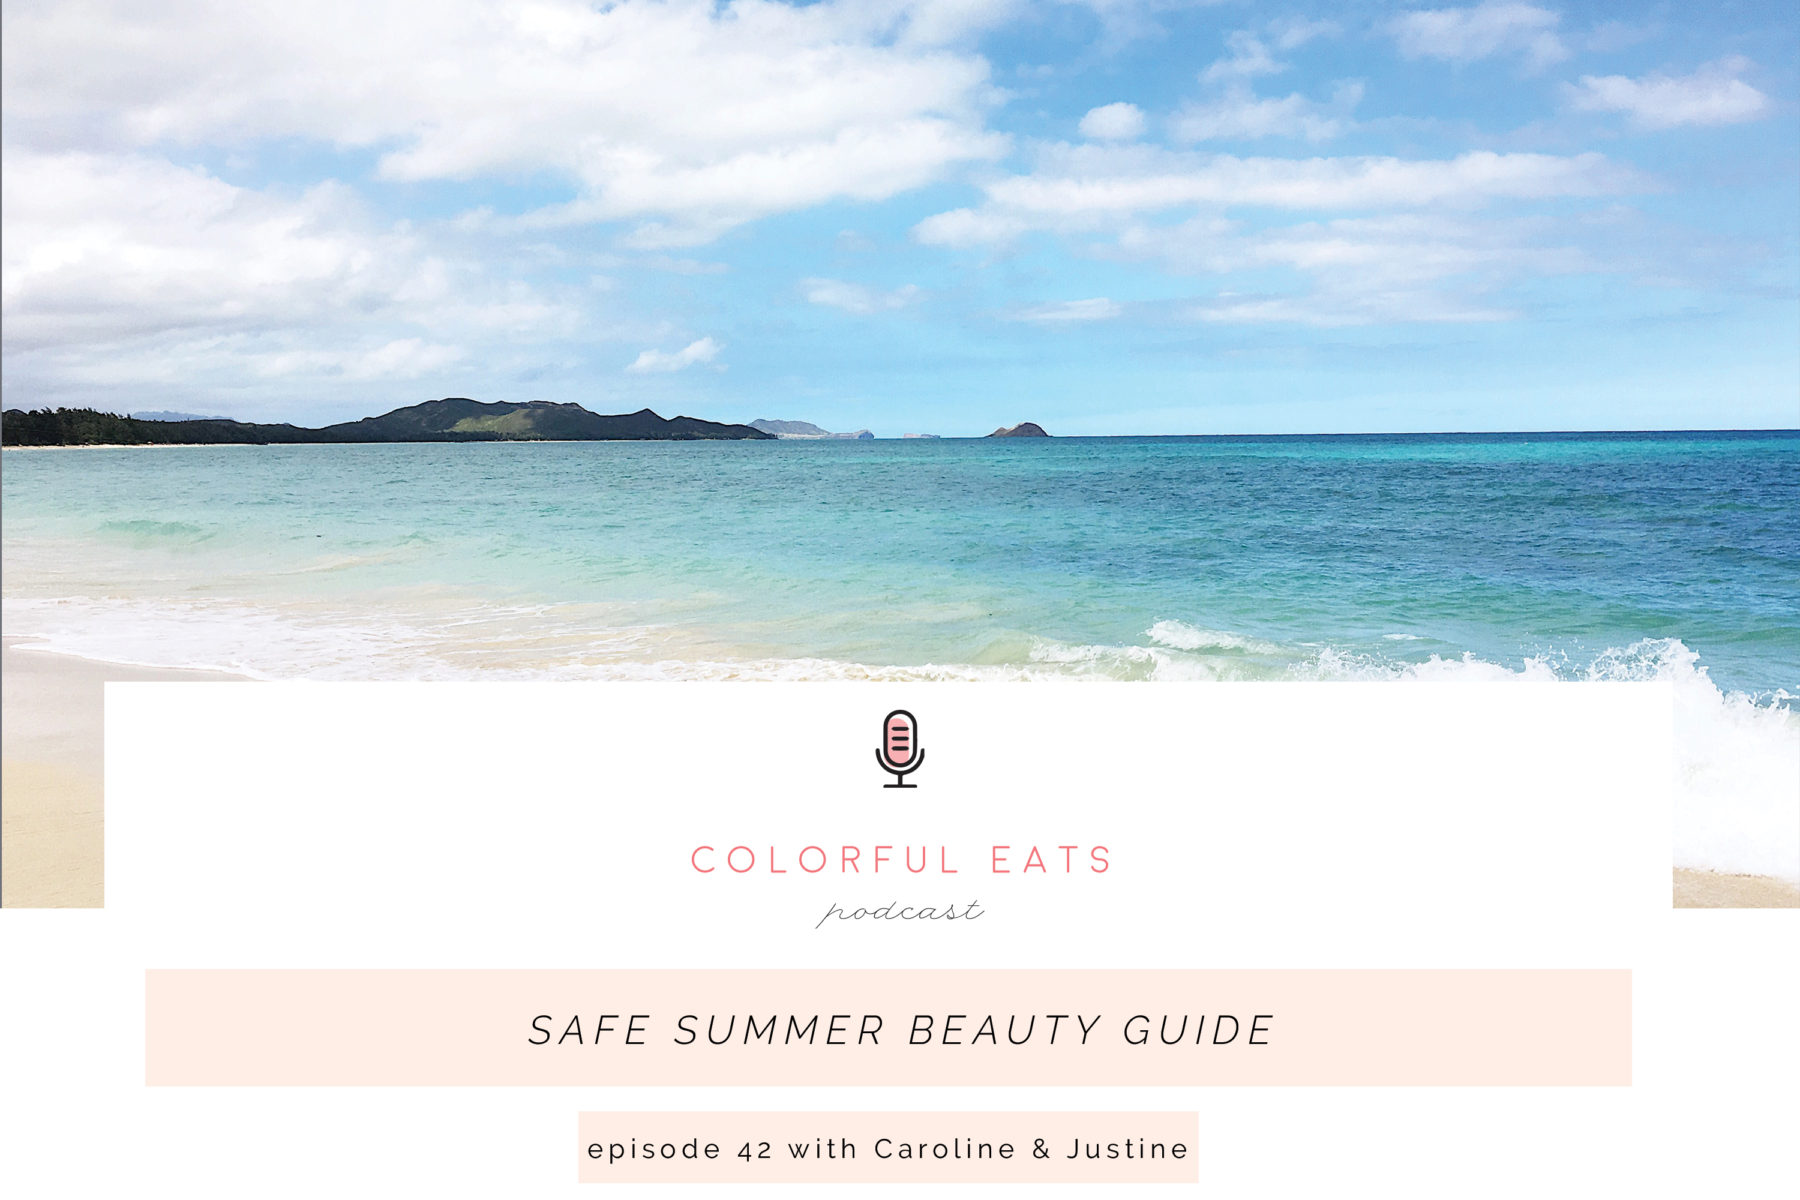 Colorful Eats Podcast Episode 42: Safe Summer Beauty Guide